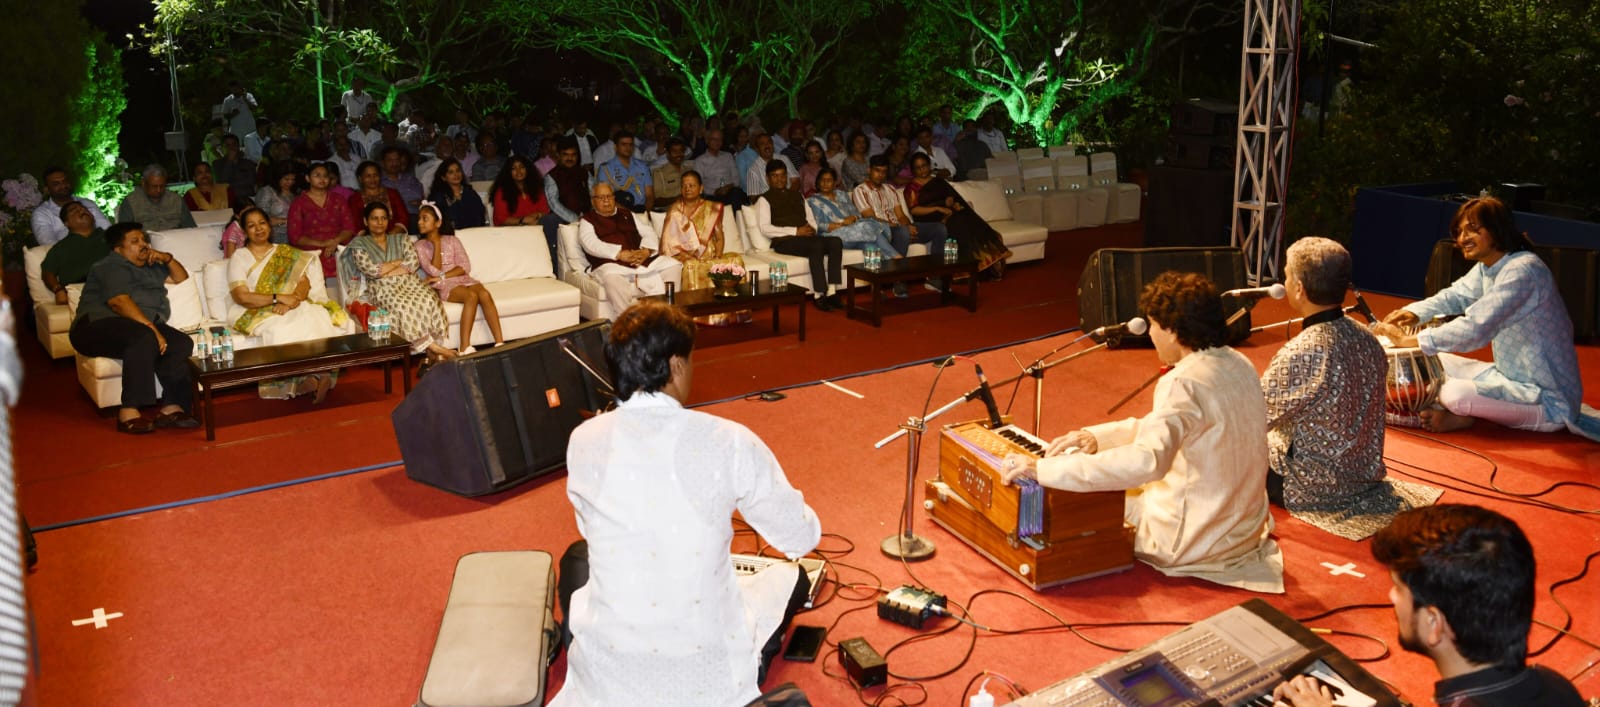 Hon'ble Governor witnesses cultural event organised at Mt Abu